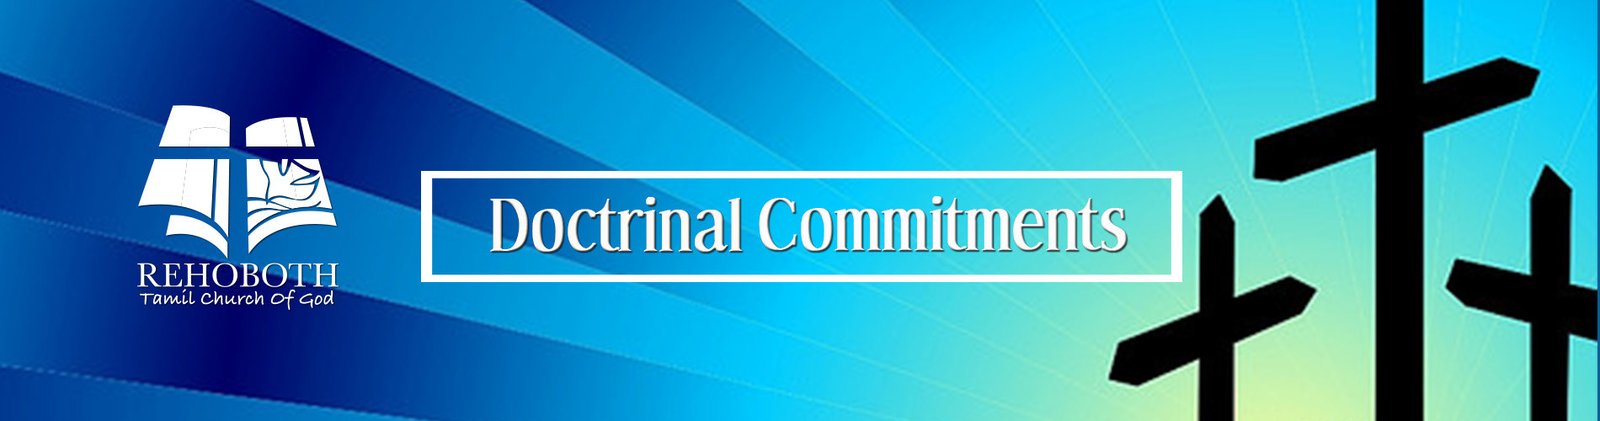 Doctrinal Commitments